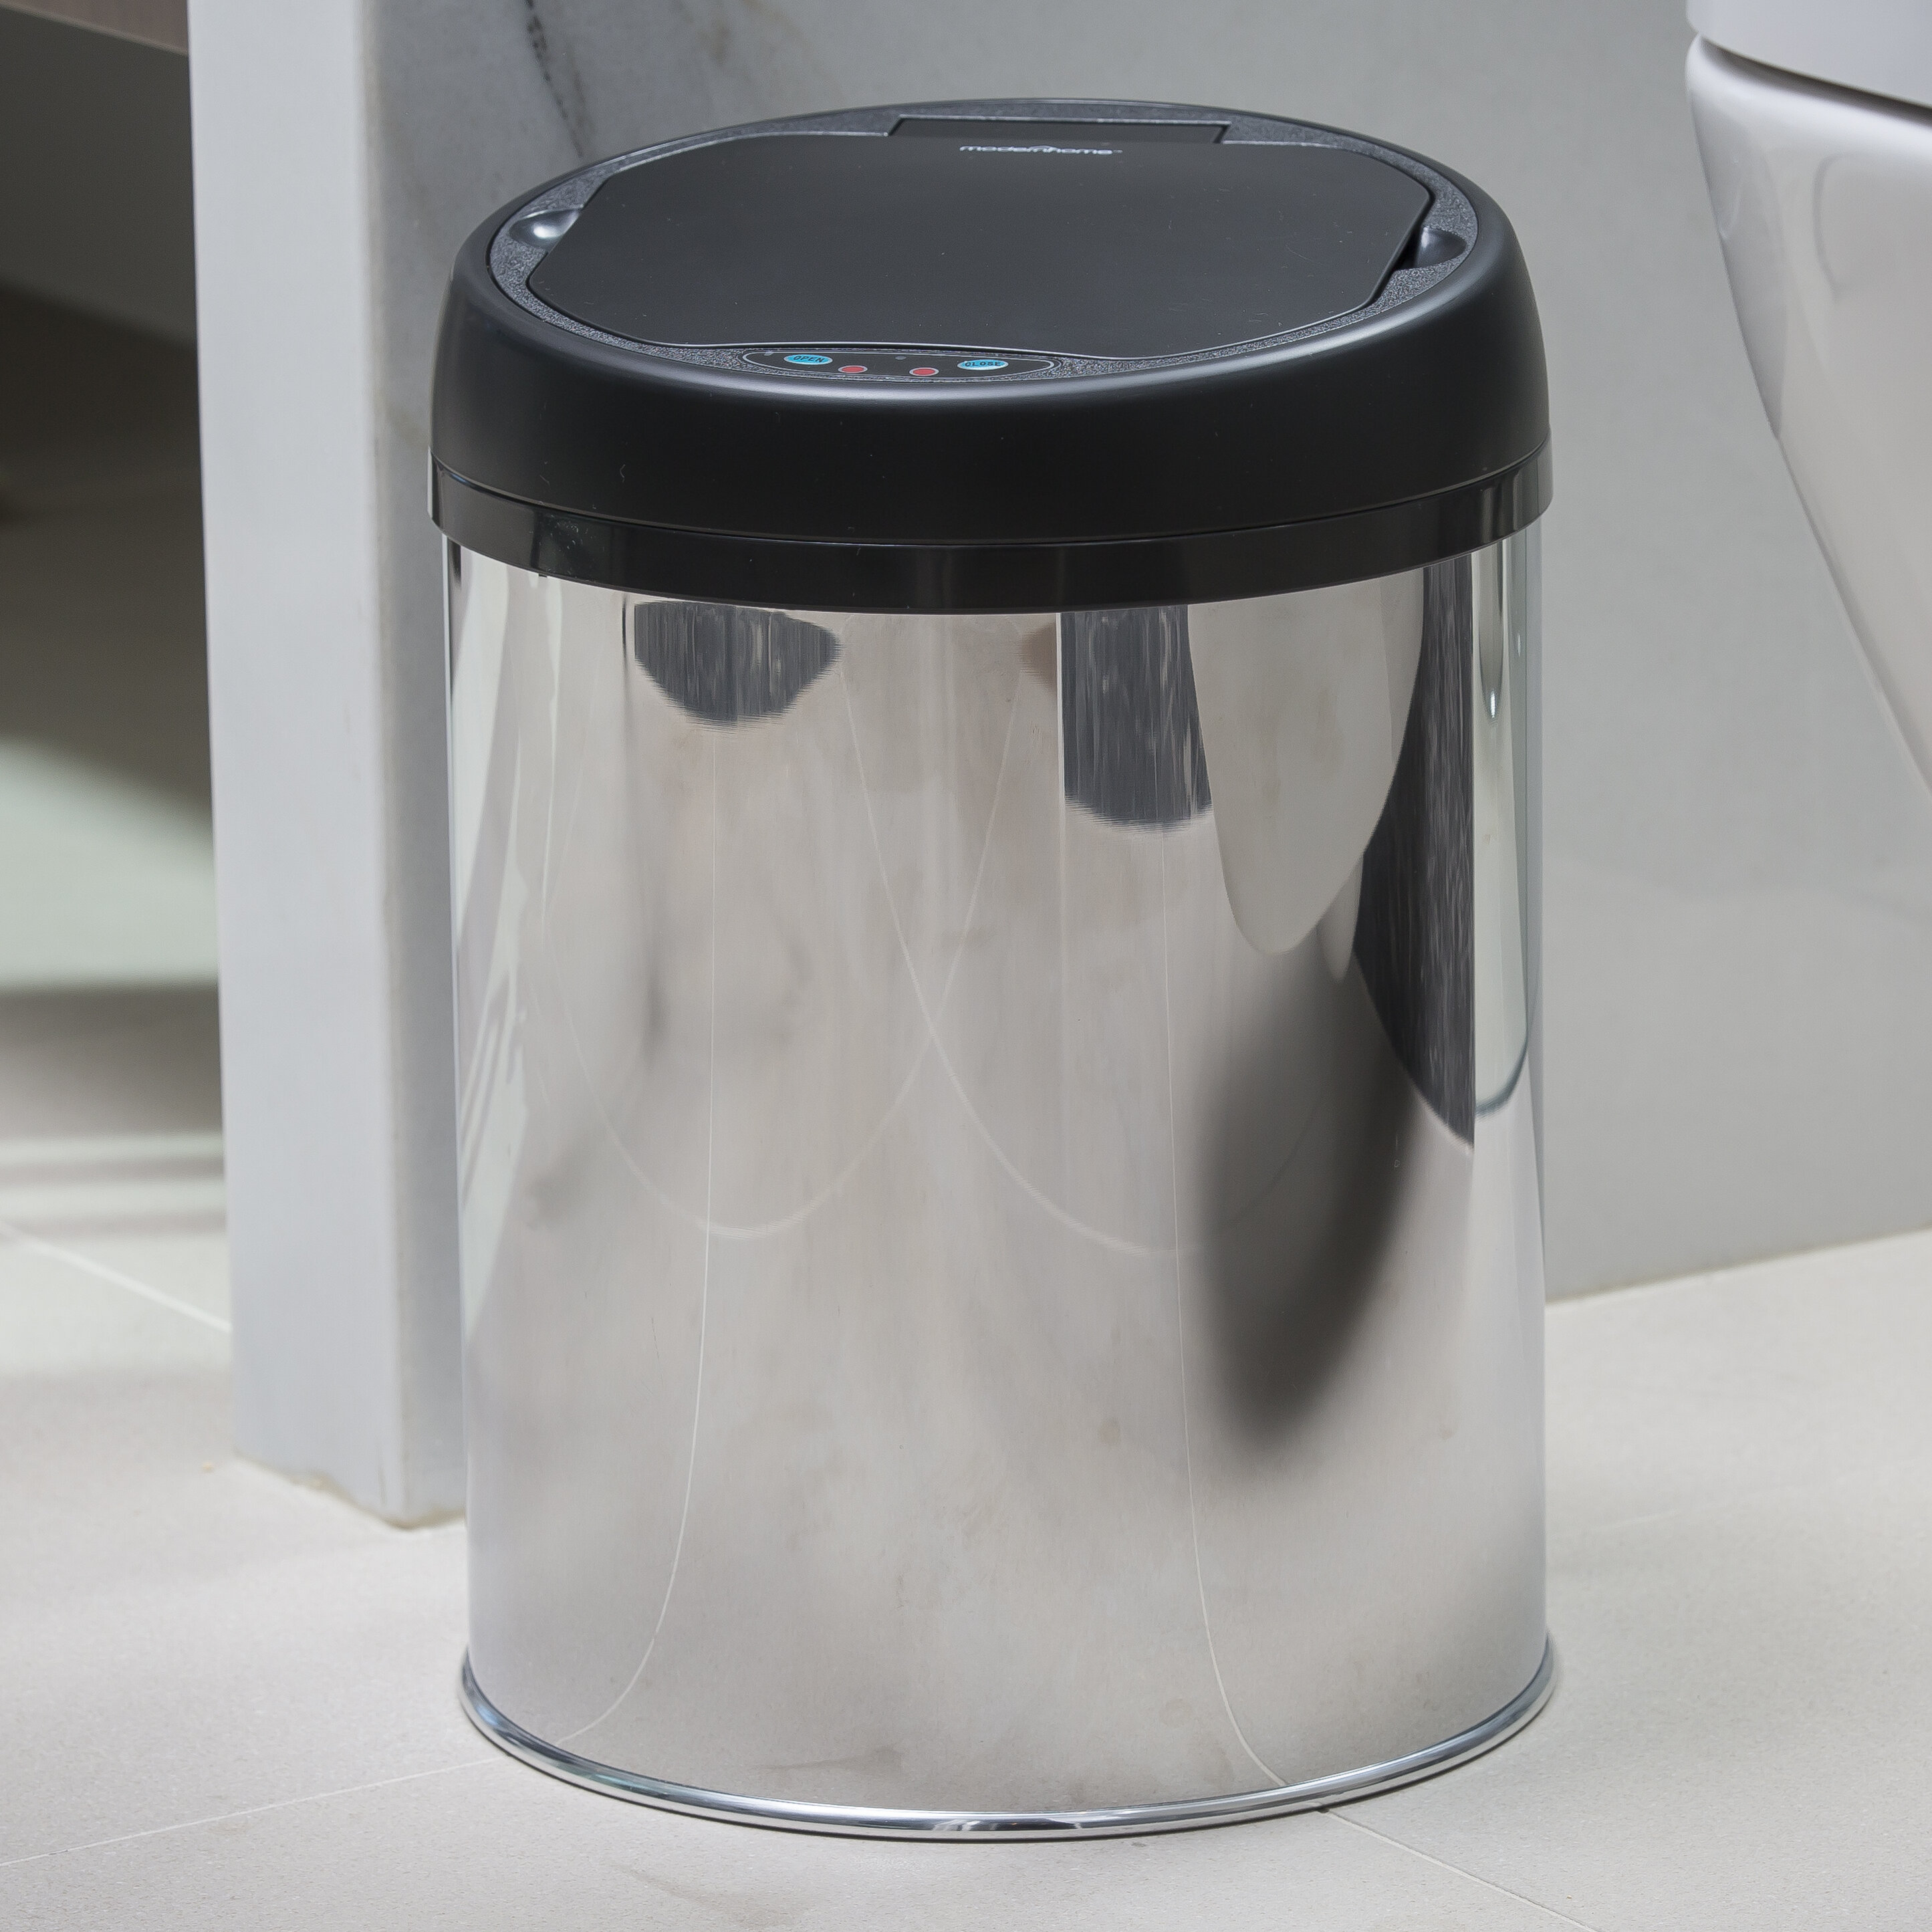 Simplehuman Modern Trash Can Has Auto-Opening Sensor and Holds